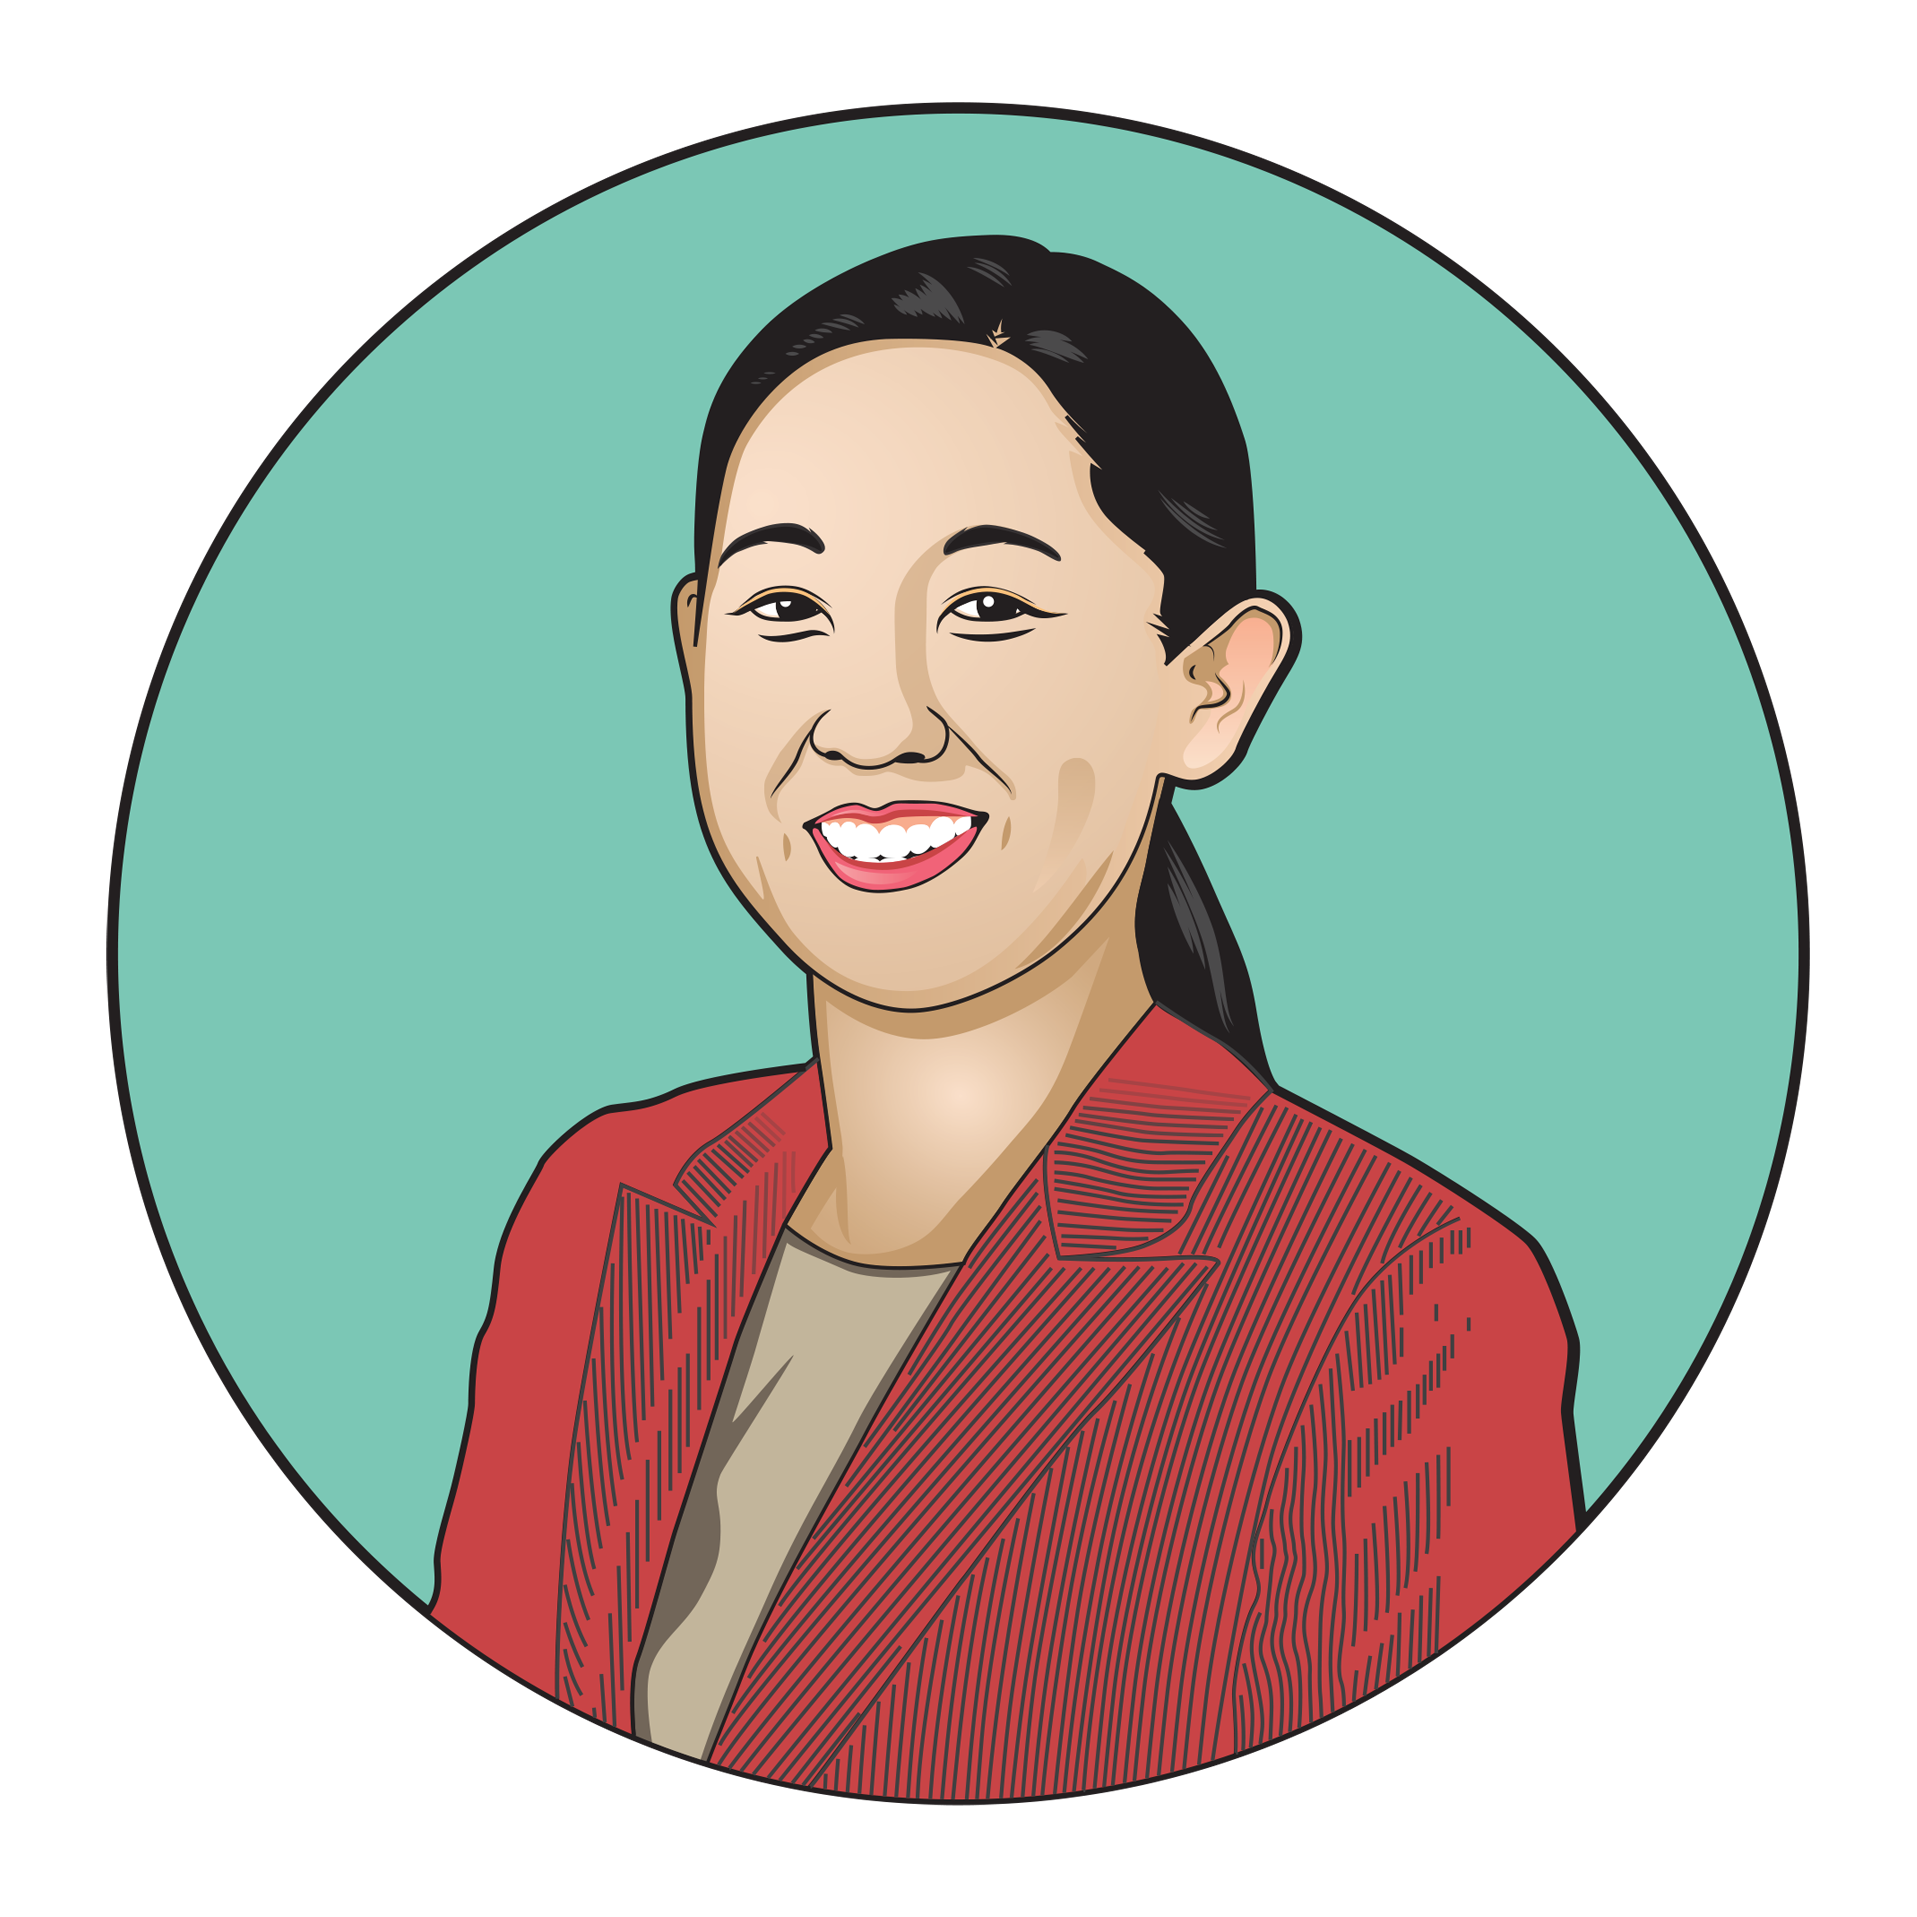 Illustrated image of Lisa, an Asian woman wearing a red blazer with a beige shirt underneath. Her image is on a teal background.